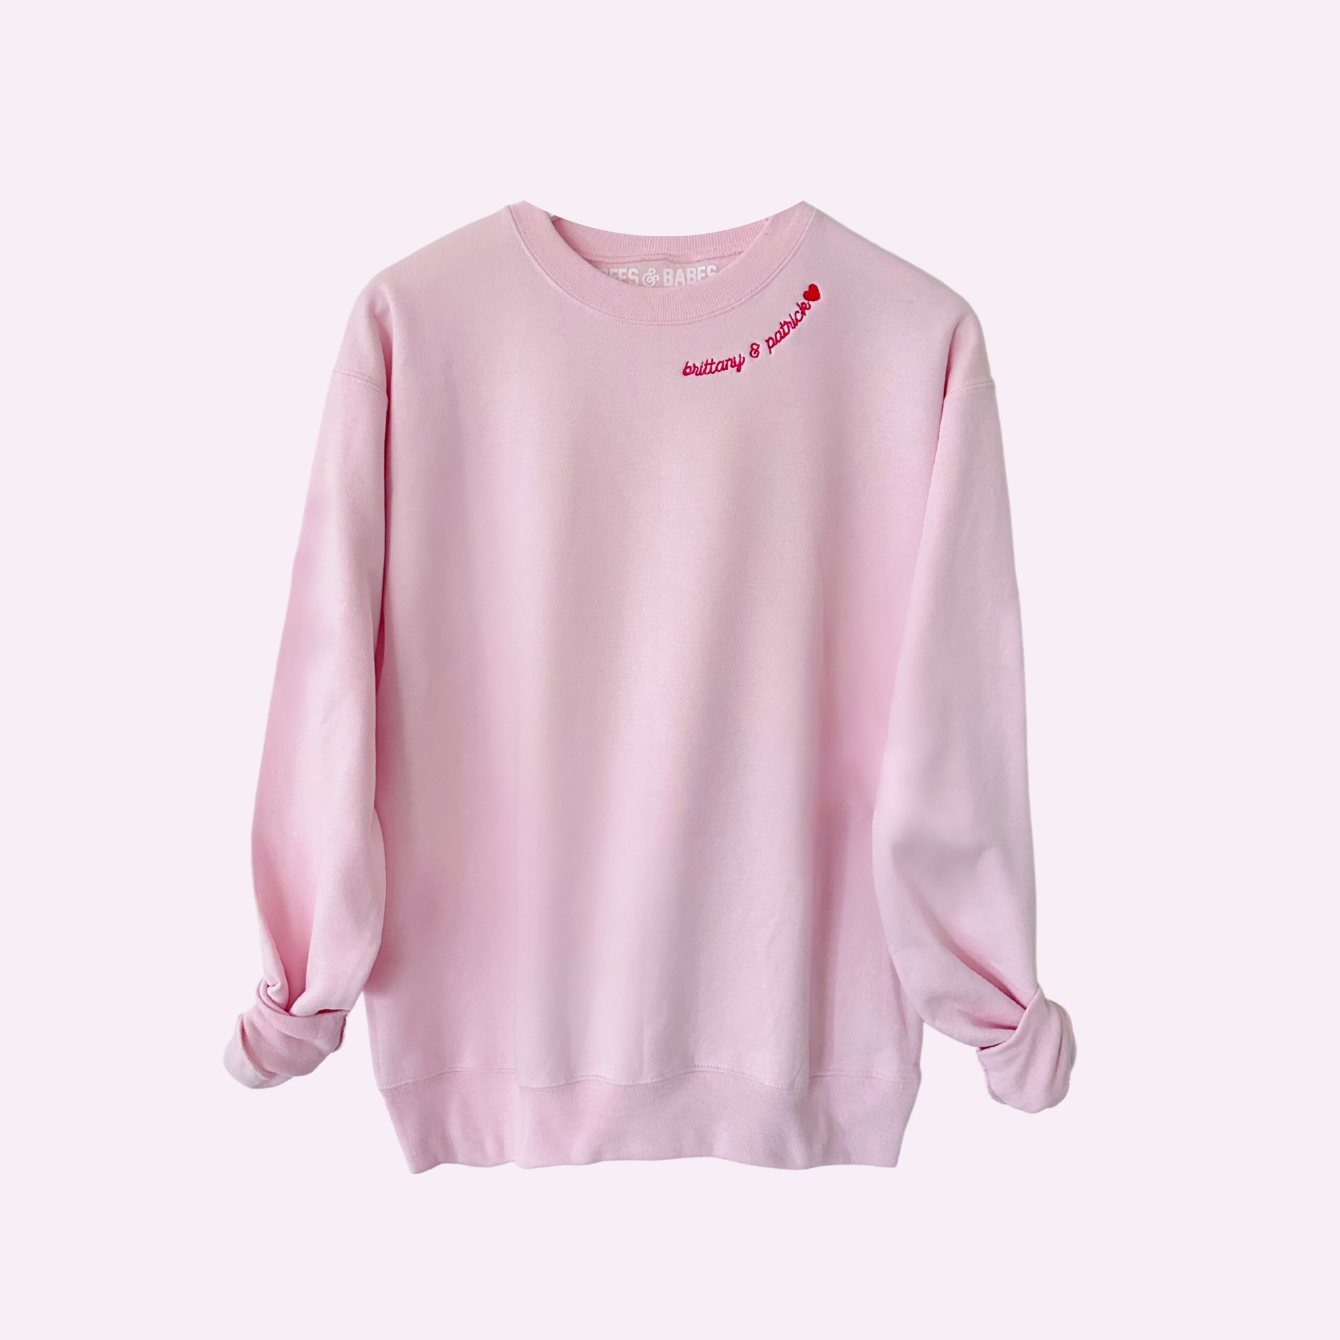 PINK WITH RED STITCH ♡ adult embroidered sweatshirt with heart